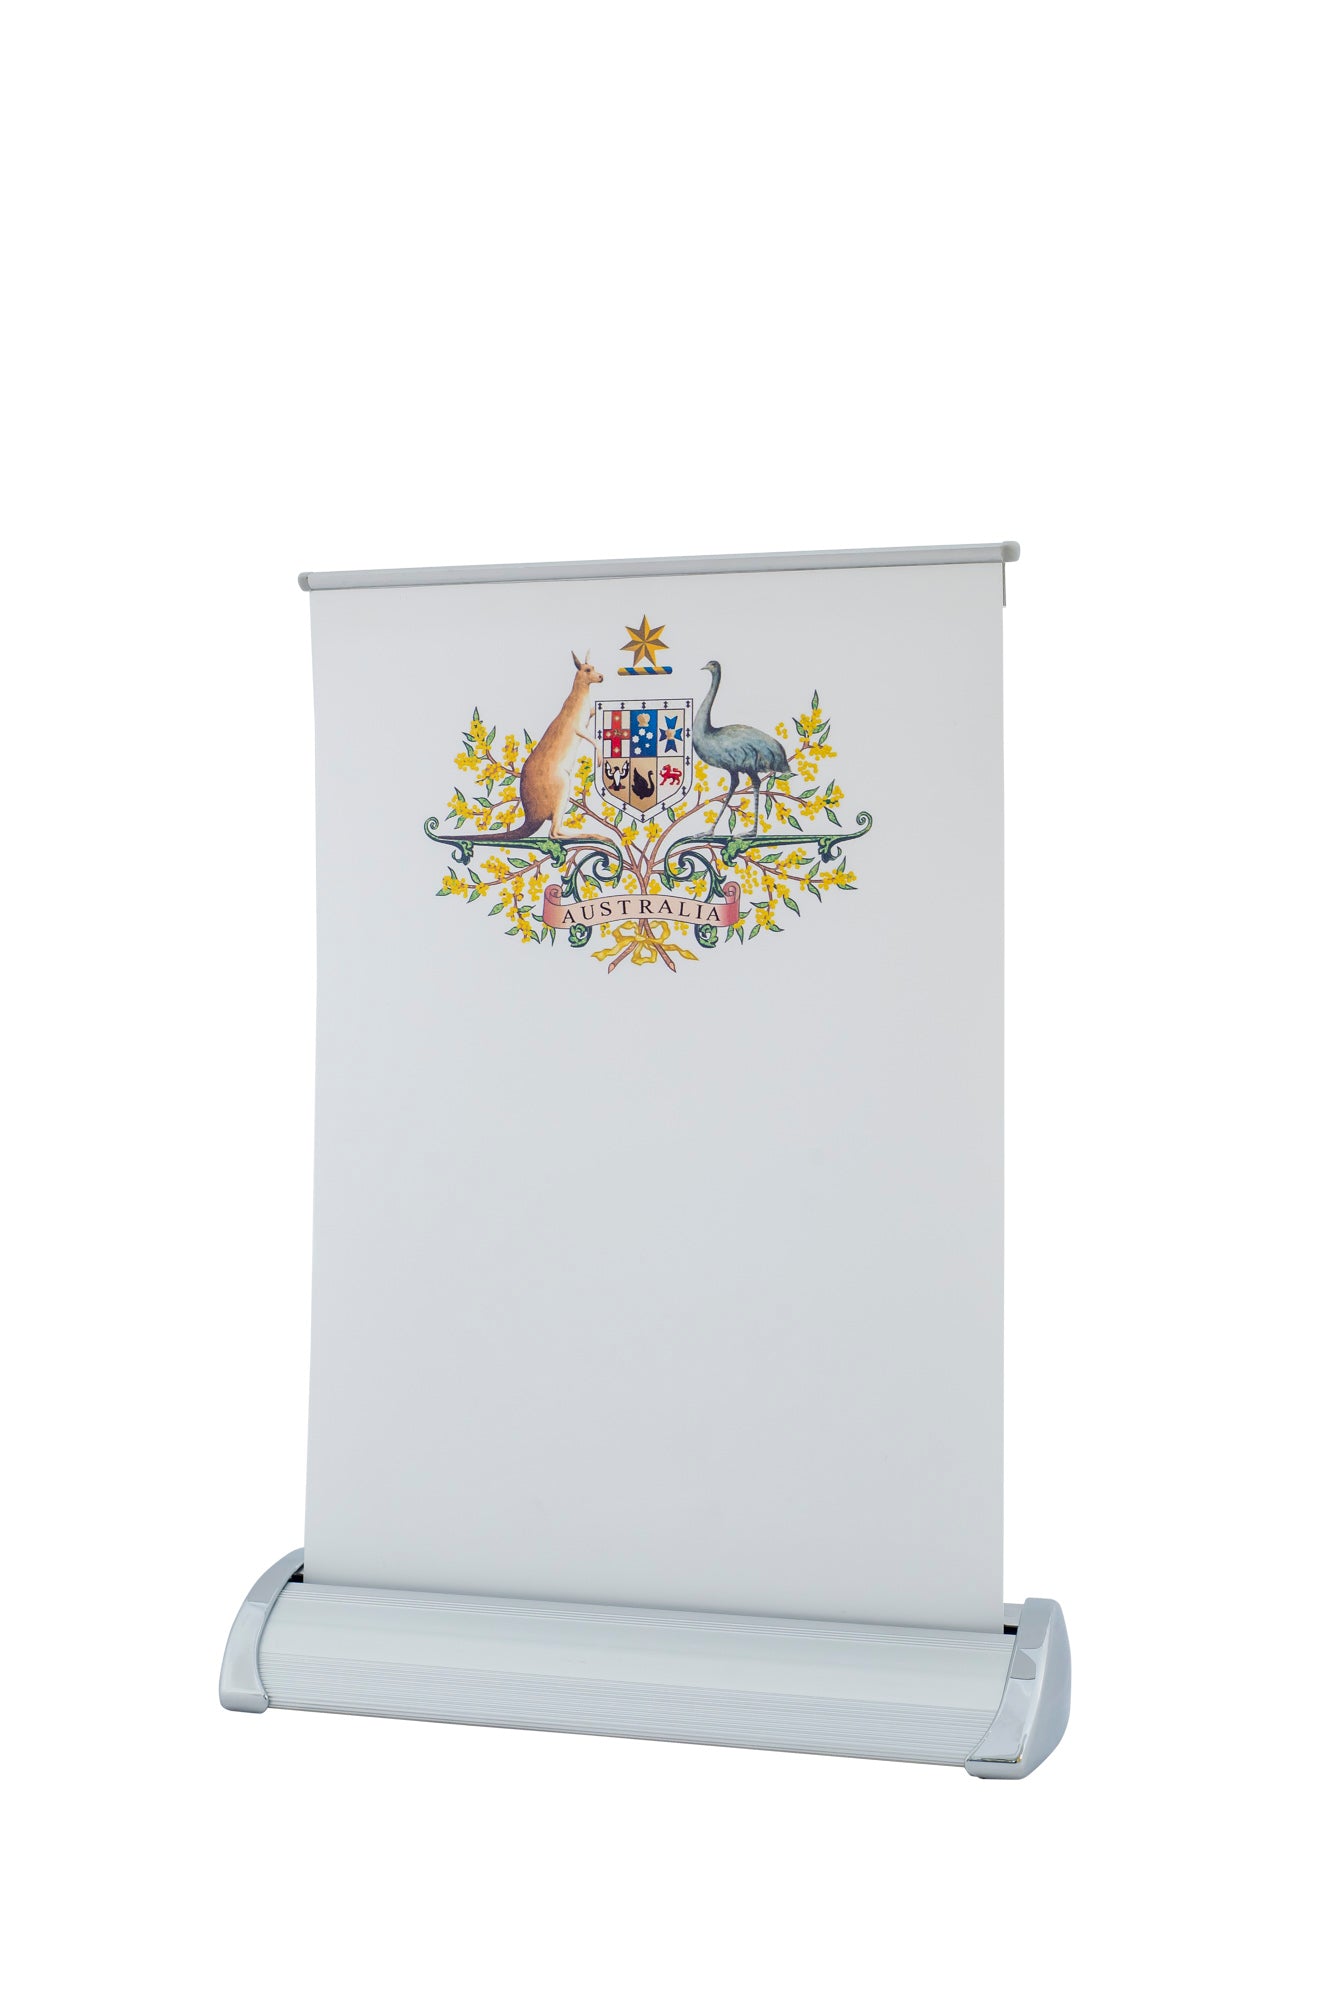 Coat of Arms pull up banner (A4 Size)